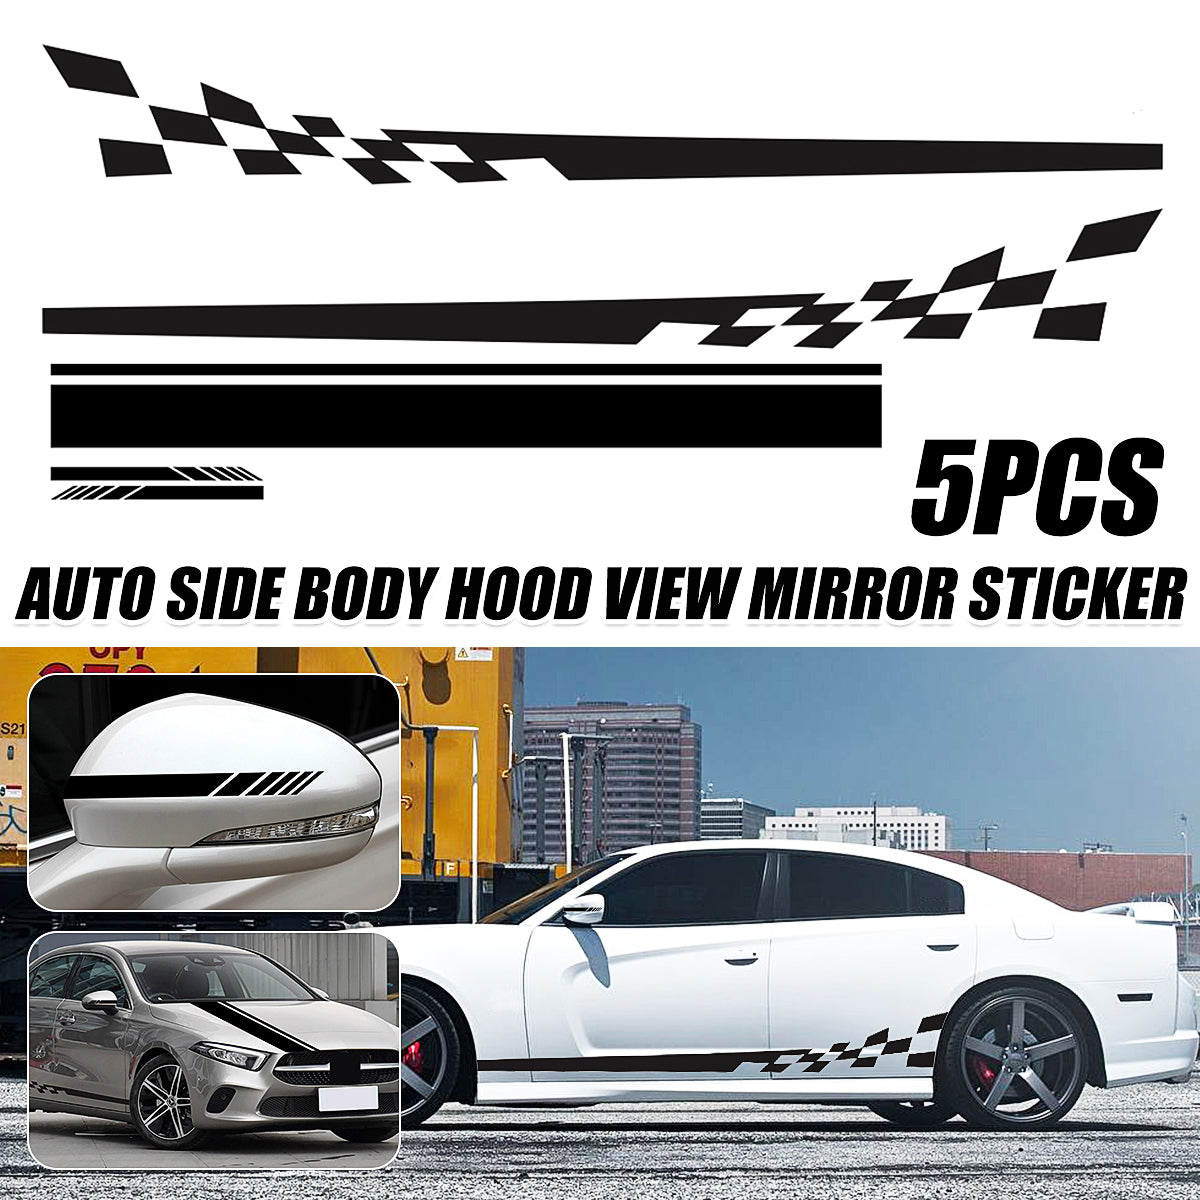 Cadet Blue 5pcs Car Stickers Stripes Graphics Side Body Hood Rearview Mirror Decal Trim